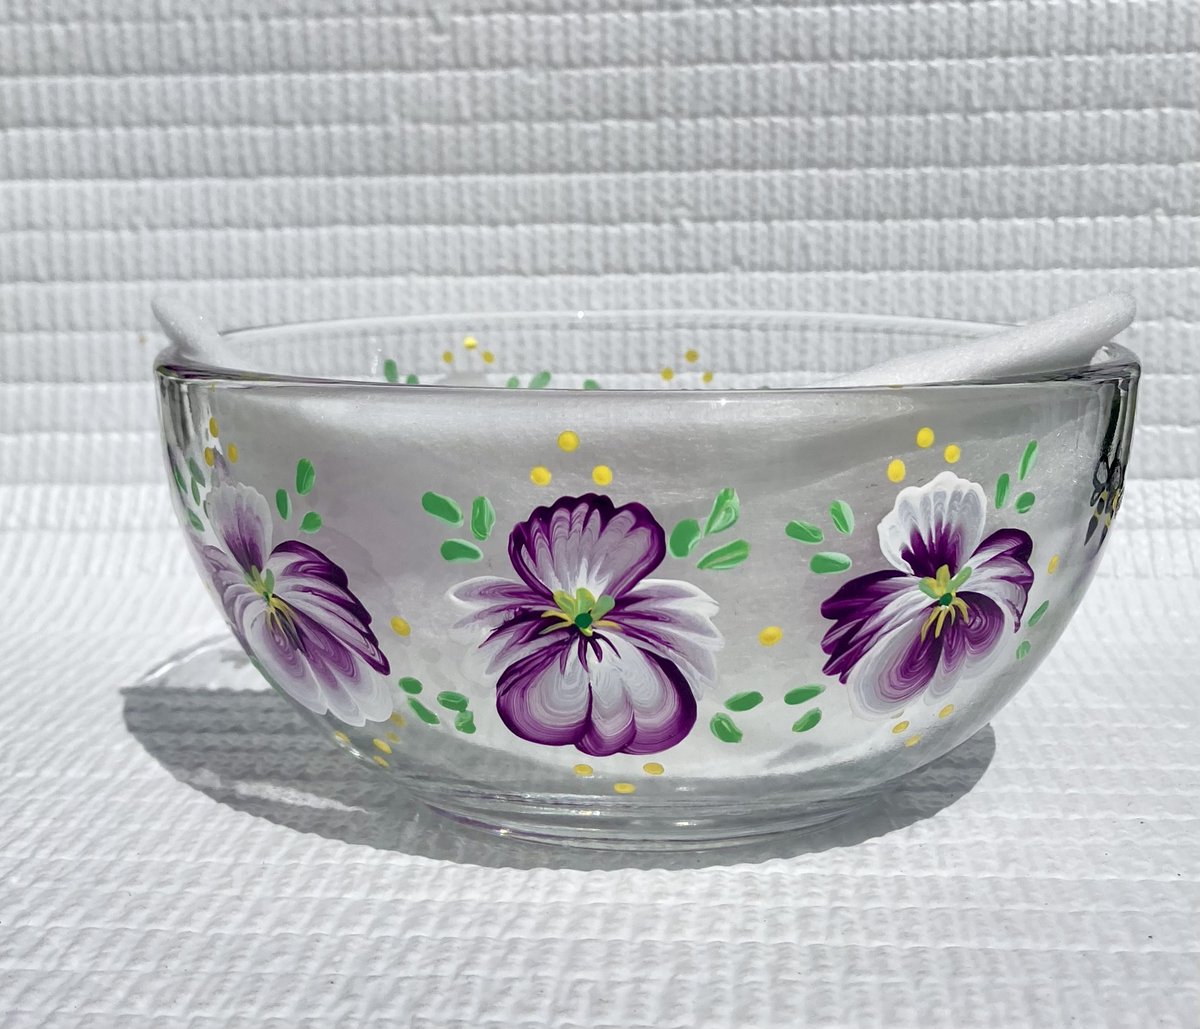 Check out this pansy bowl etsy.com/listing/171011… #bowl #floralbowl #pansybowl #SMILEtt23 #candydish #etsy #etsyshop